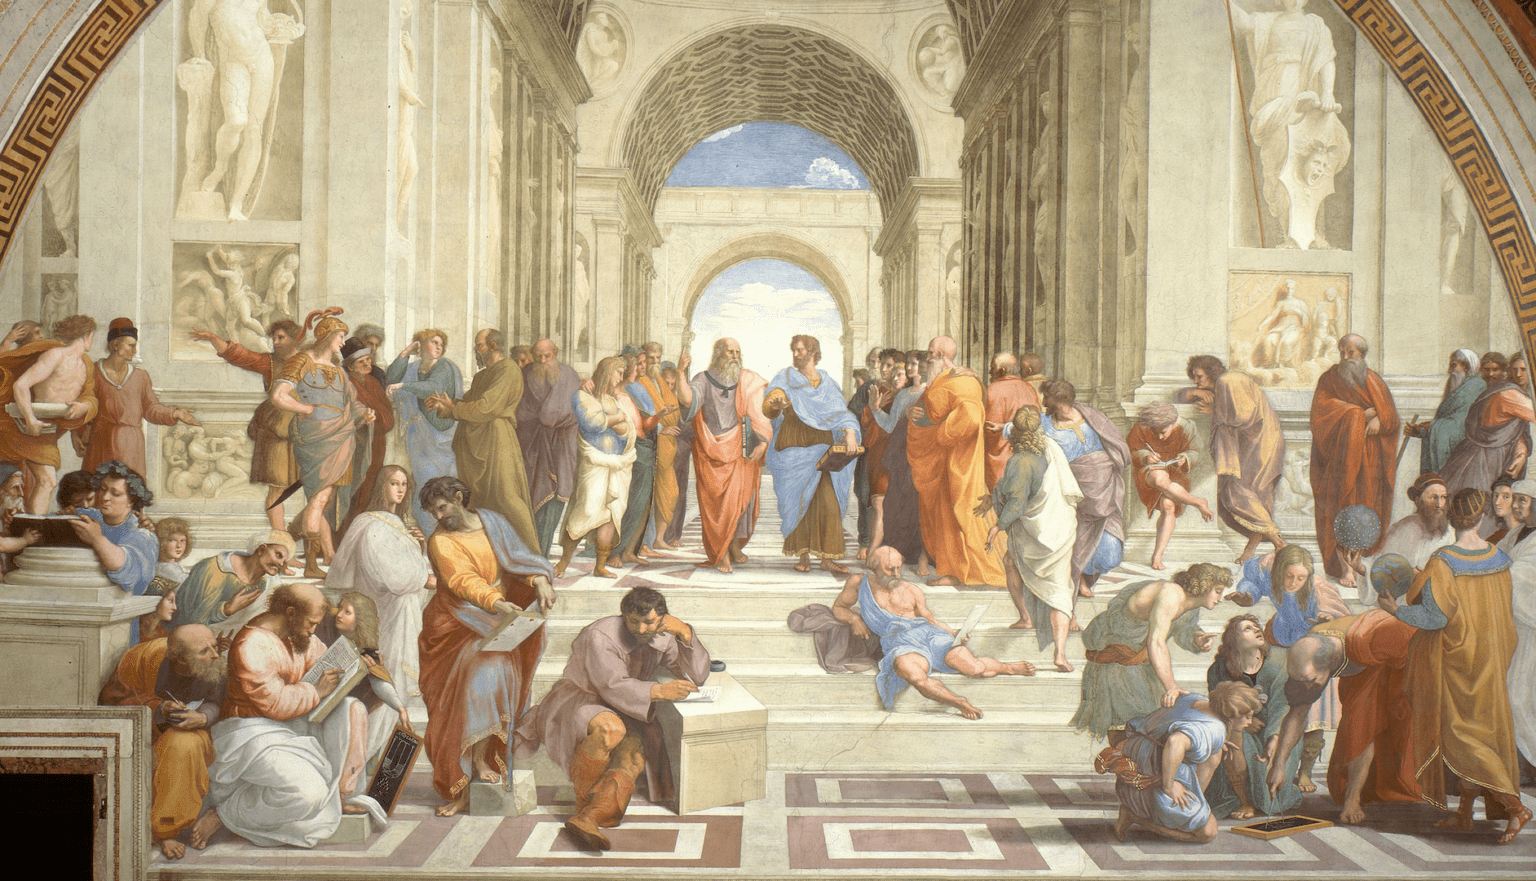 The School of Athens: A Genius of Humanism in the Renaissance